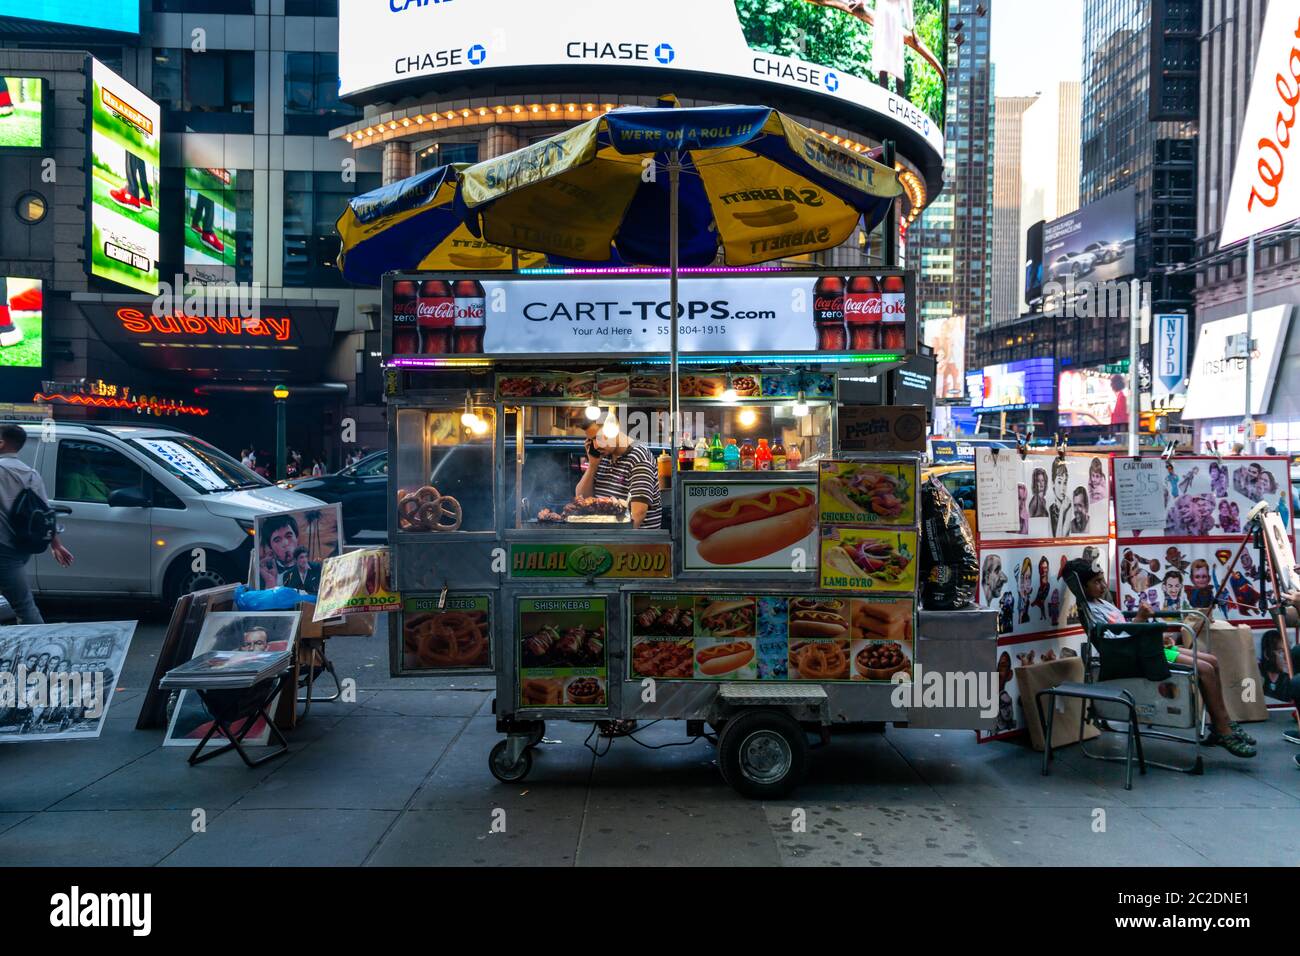 New York City / USA - JUL 13 2018: Times Square street food cart at rush hour in midtown Manhattan Stock Photo